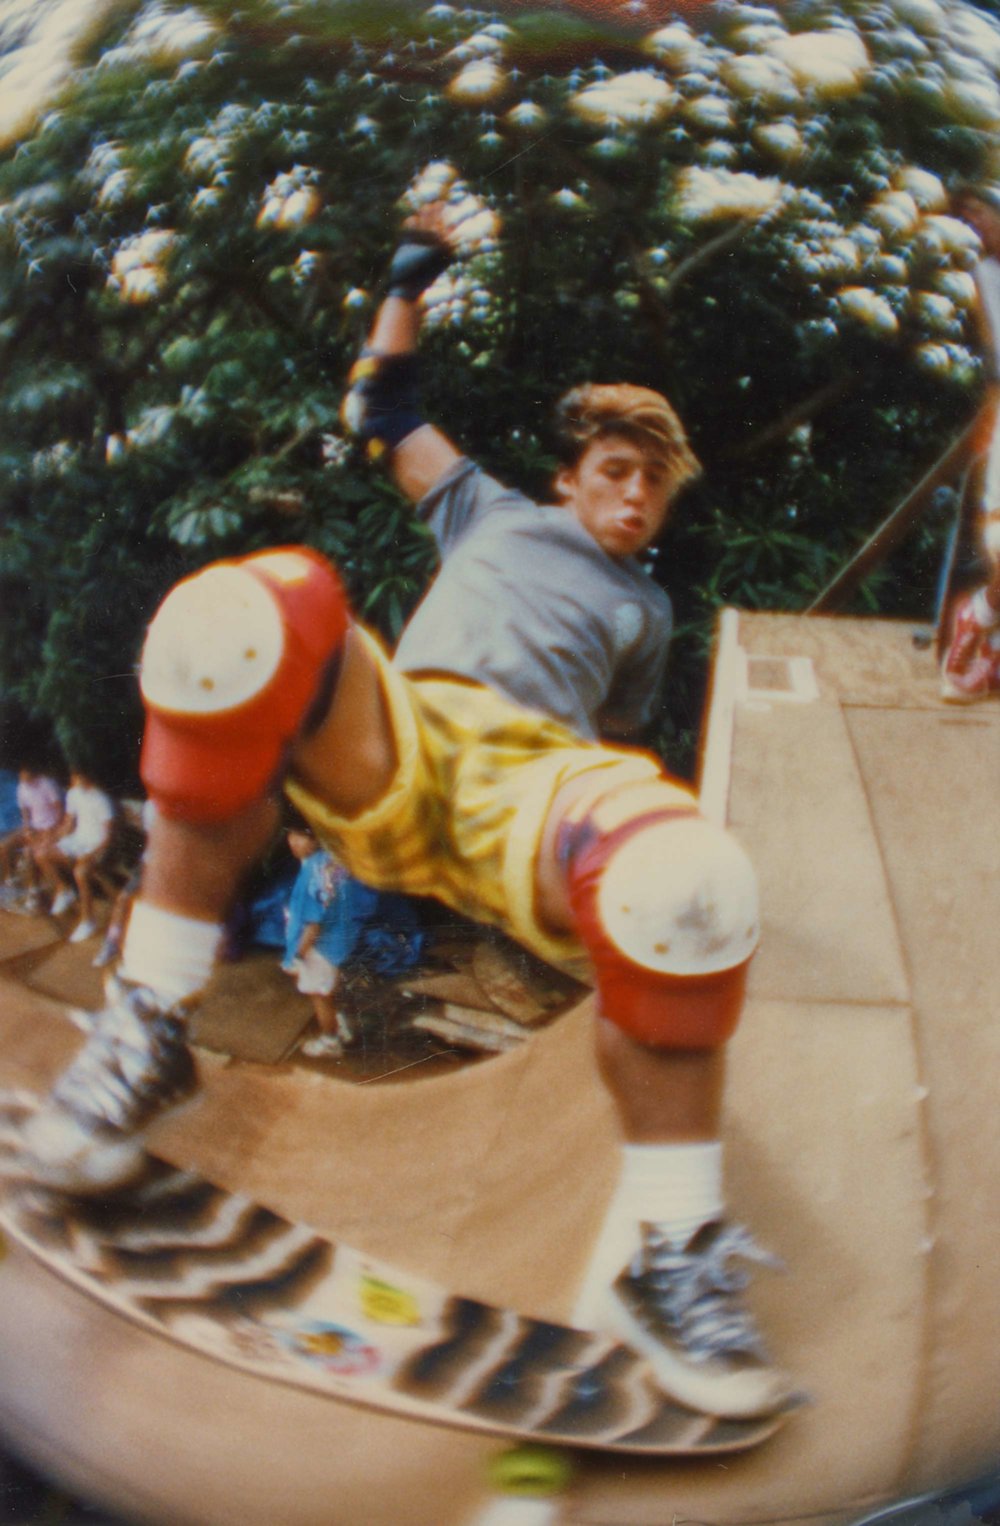 what youth steve caballero back den with mark oblow